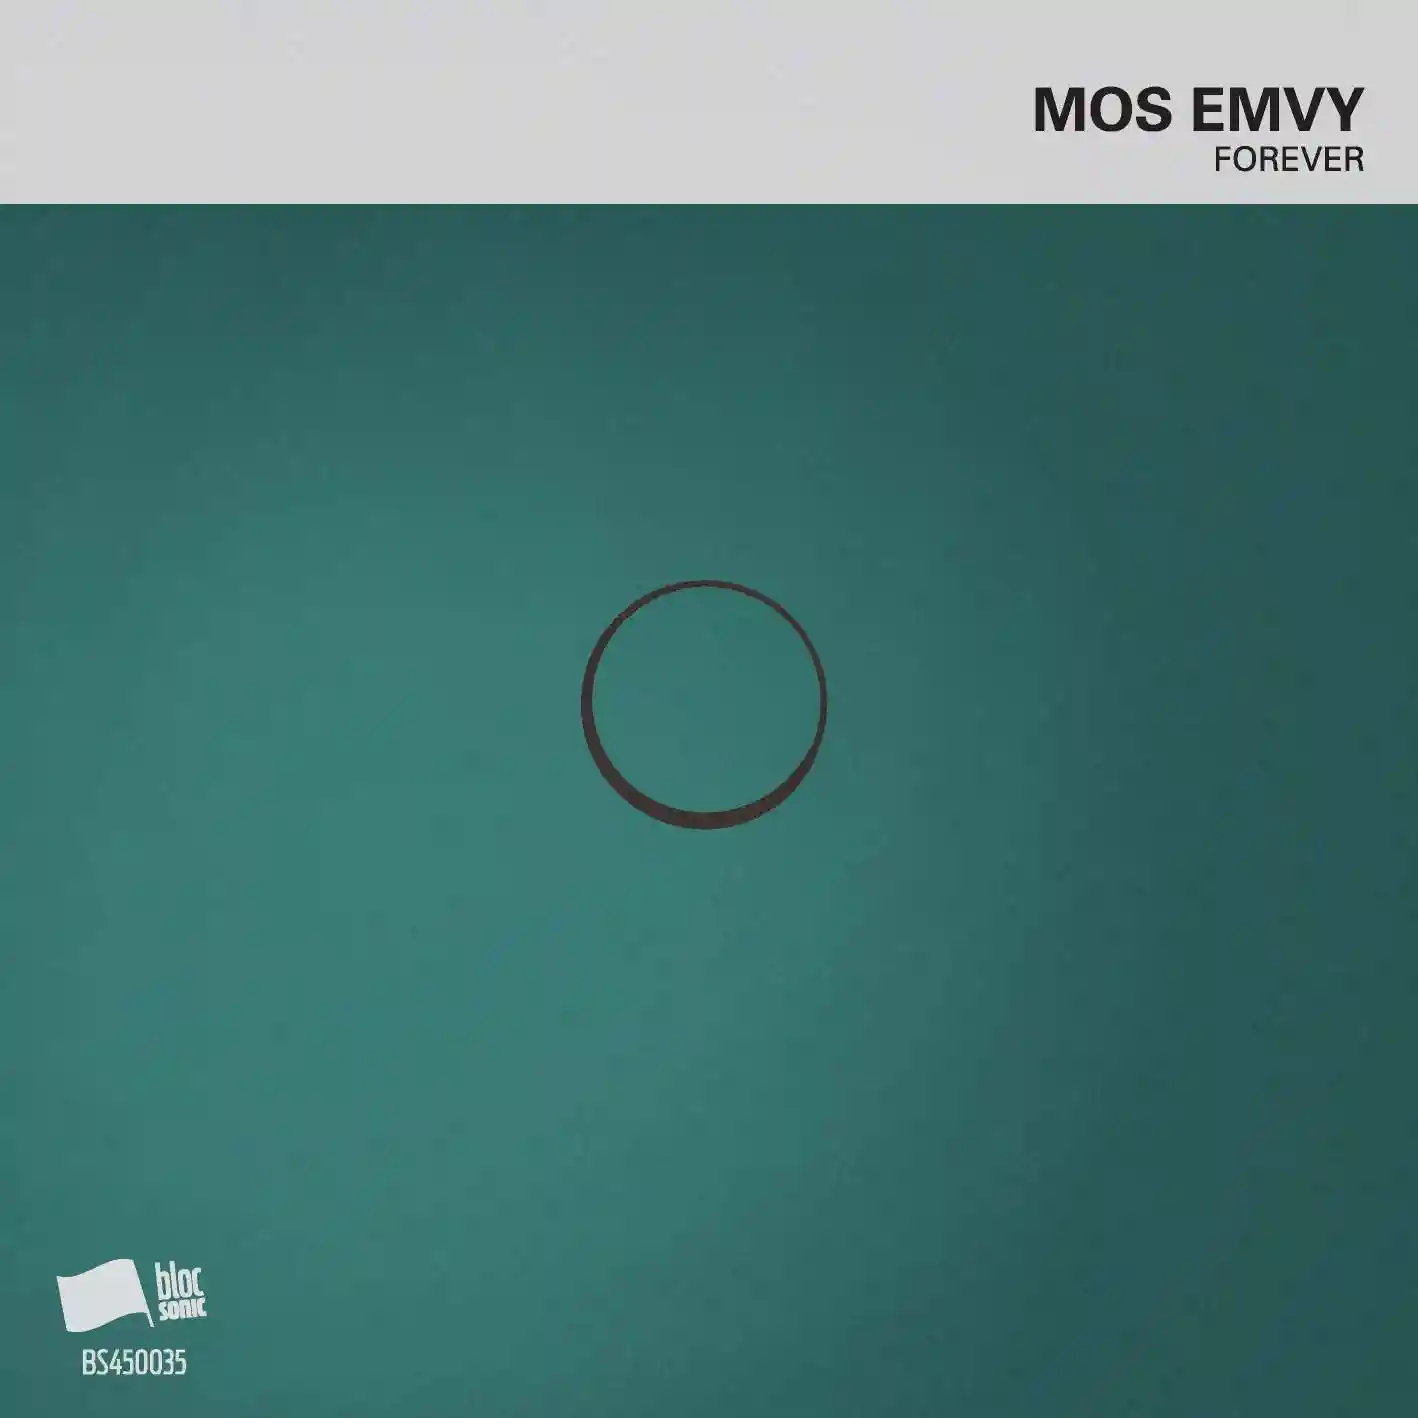 Album cover for “Forever” by Mos Emvy